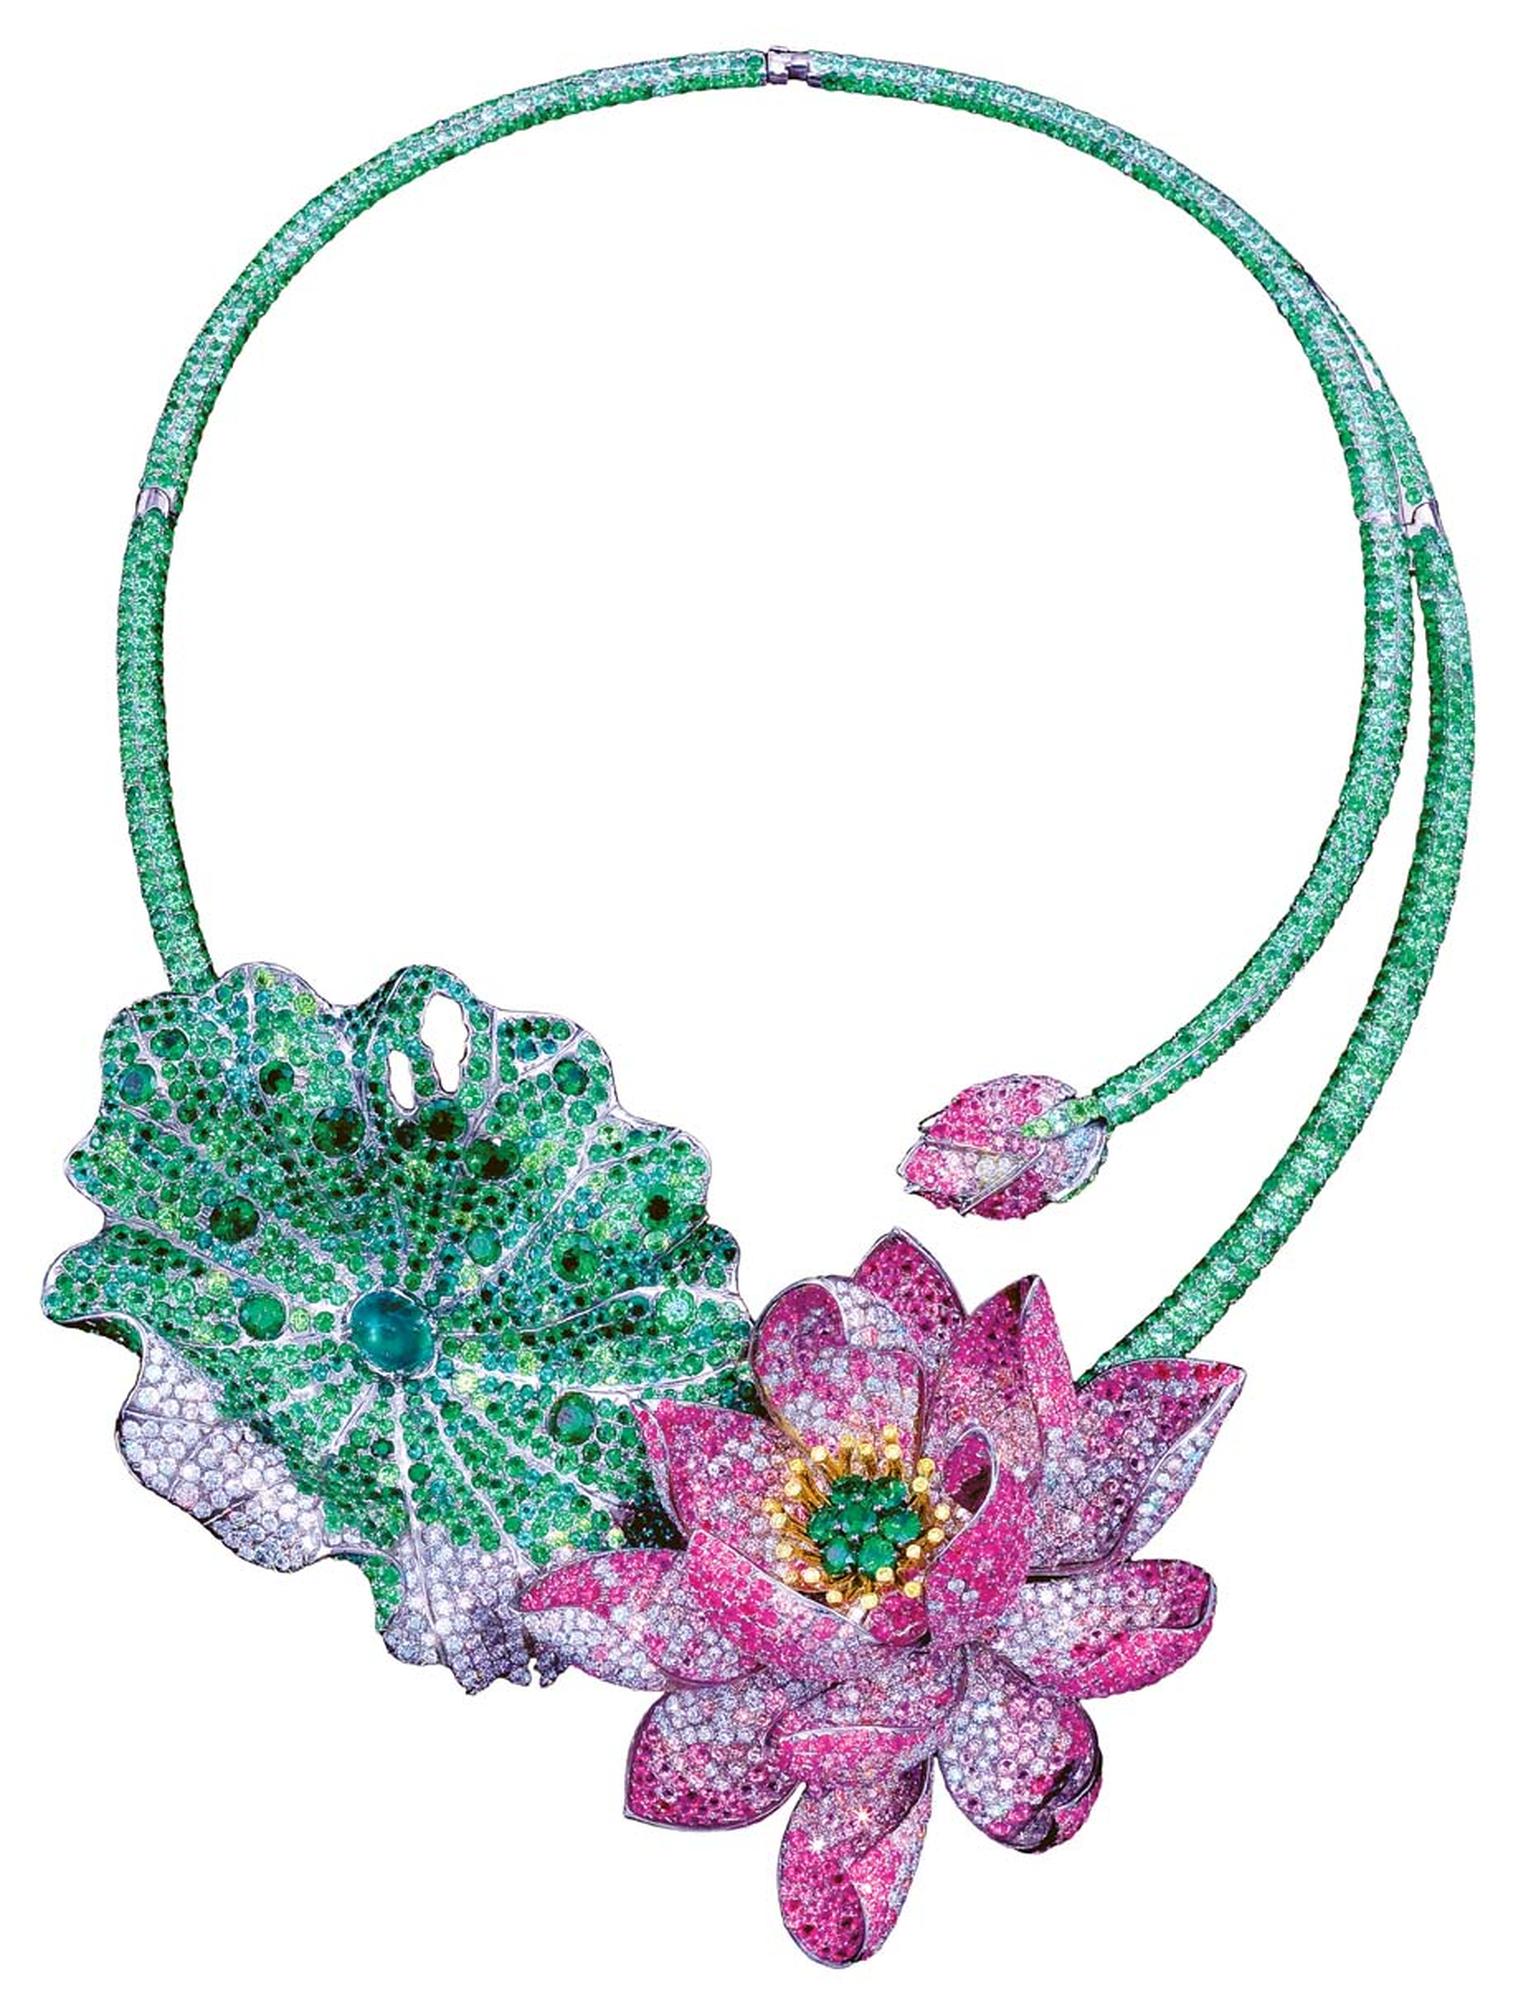 Anna Hu's Art Nouveau-style Celestial Lotus necklace features natural Fancy Intense vivid yellow, grey and white diamonds, natural Burmese rubies, Colombian emeralds, demantoid garnets, tsavorites, and multi-coloured pink sapphires, set in titanium.